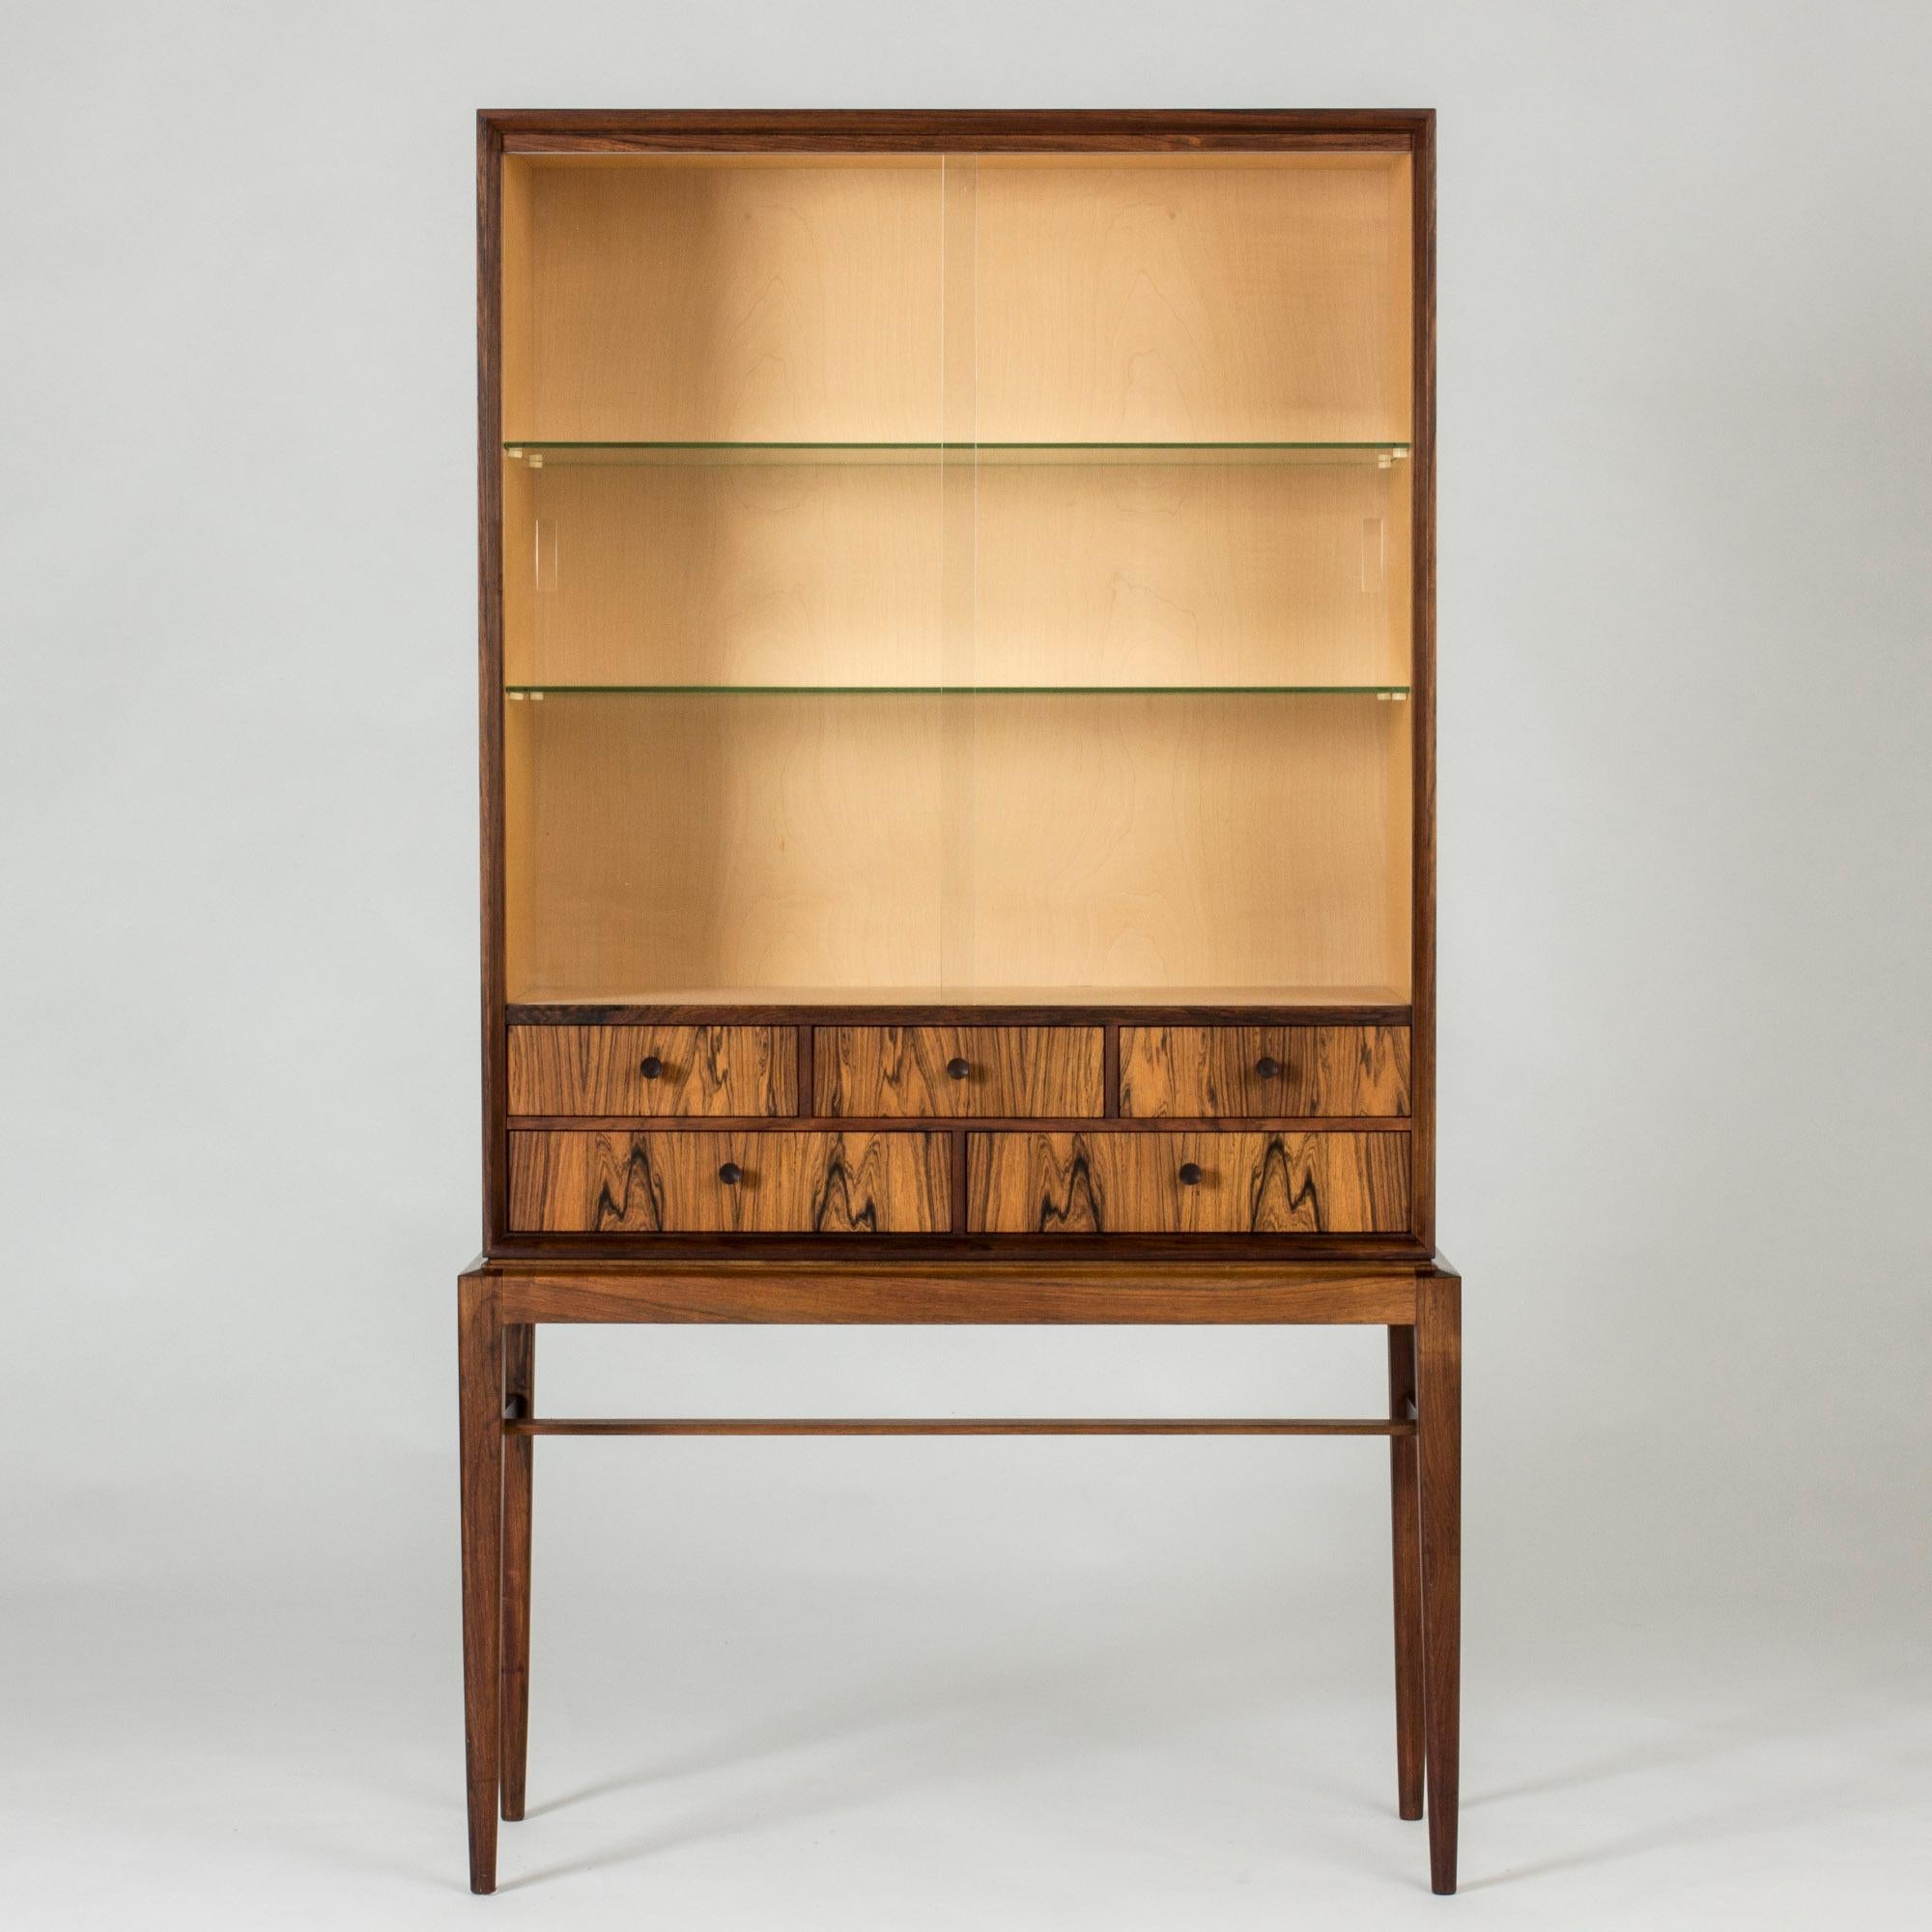 Elegant rosewood cabinet with vitrine doors and glass shelves by Svante Skogh. Small drawers with beautiful woodgrain. Slender legs give the cabinet a light expression.